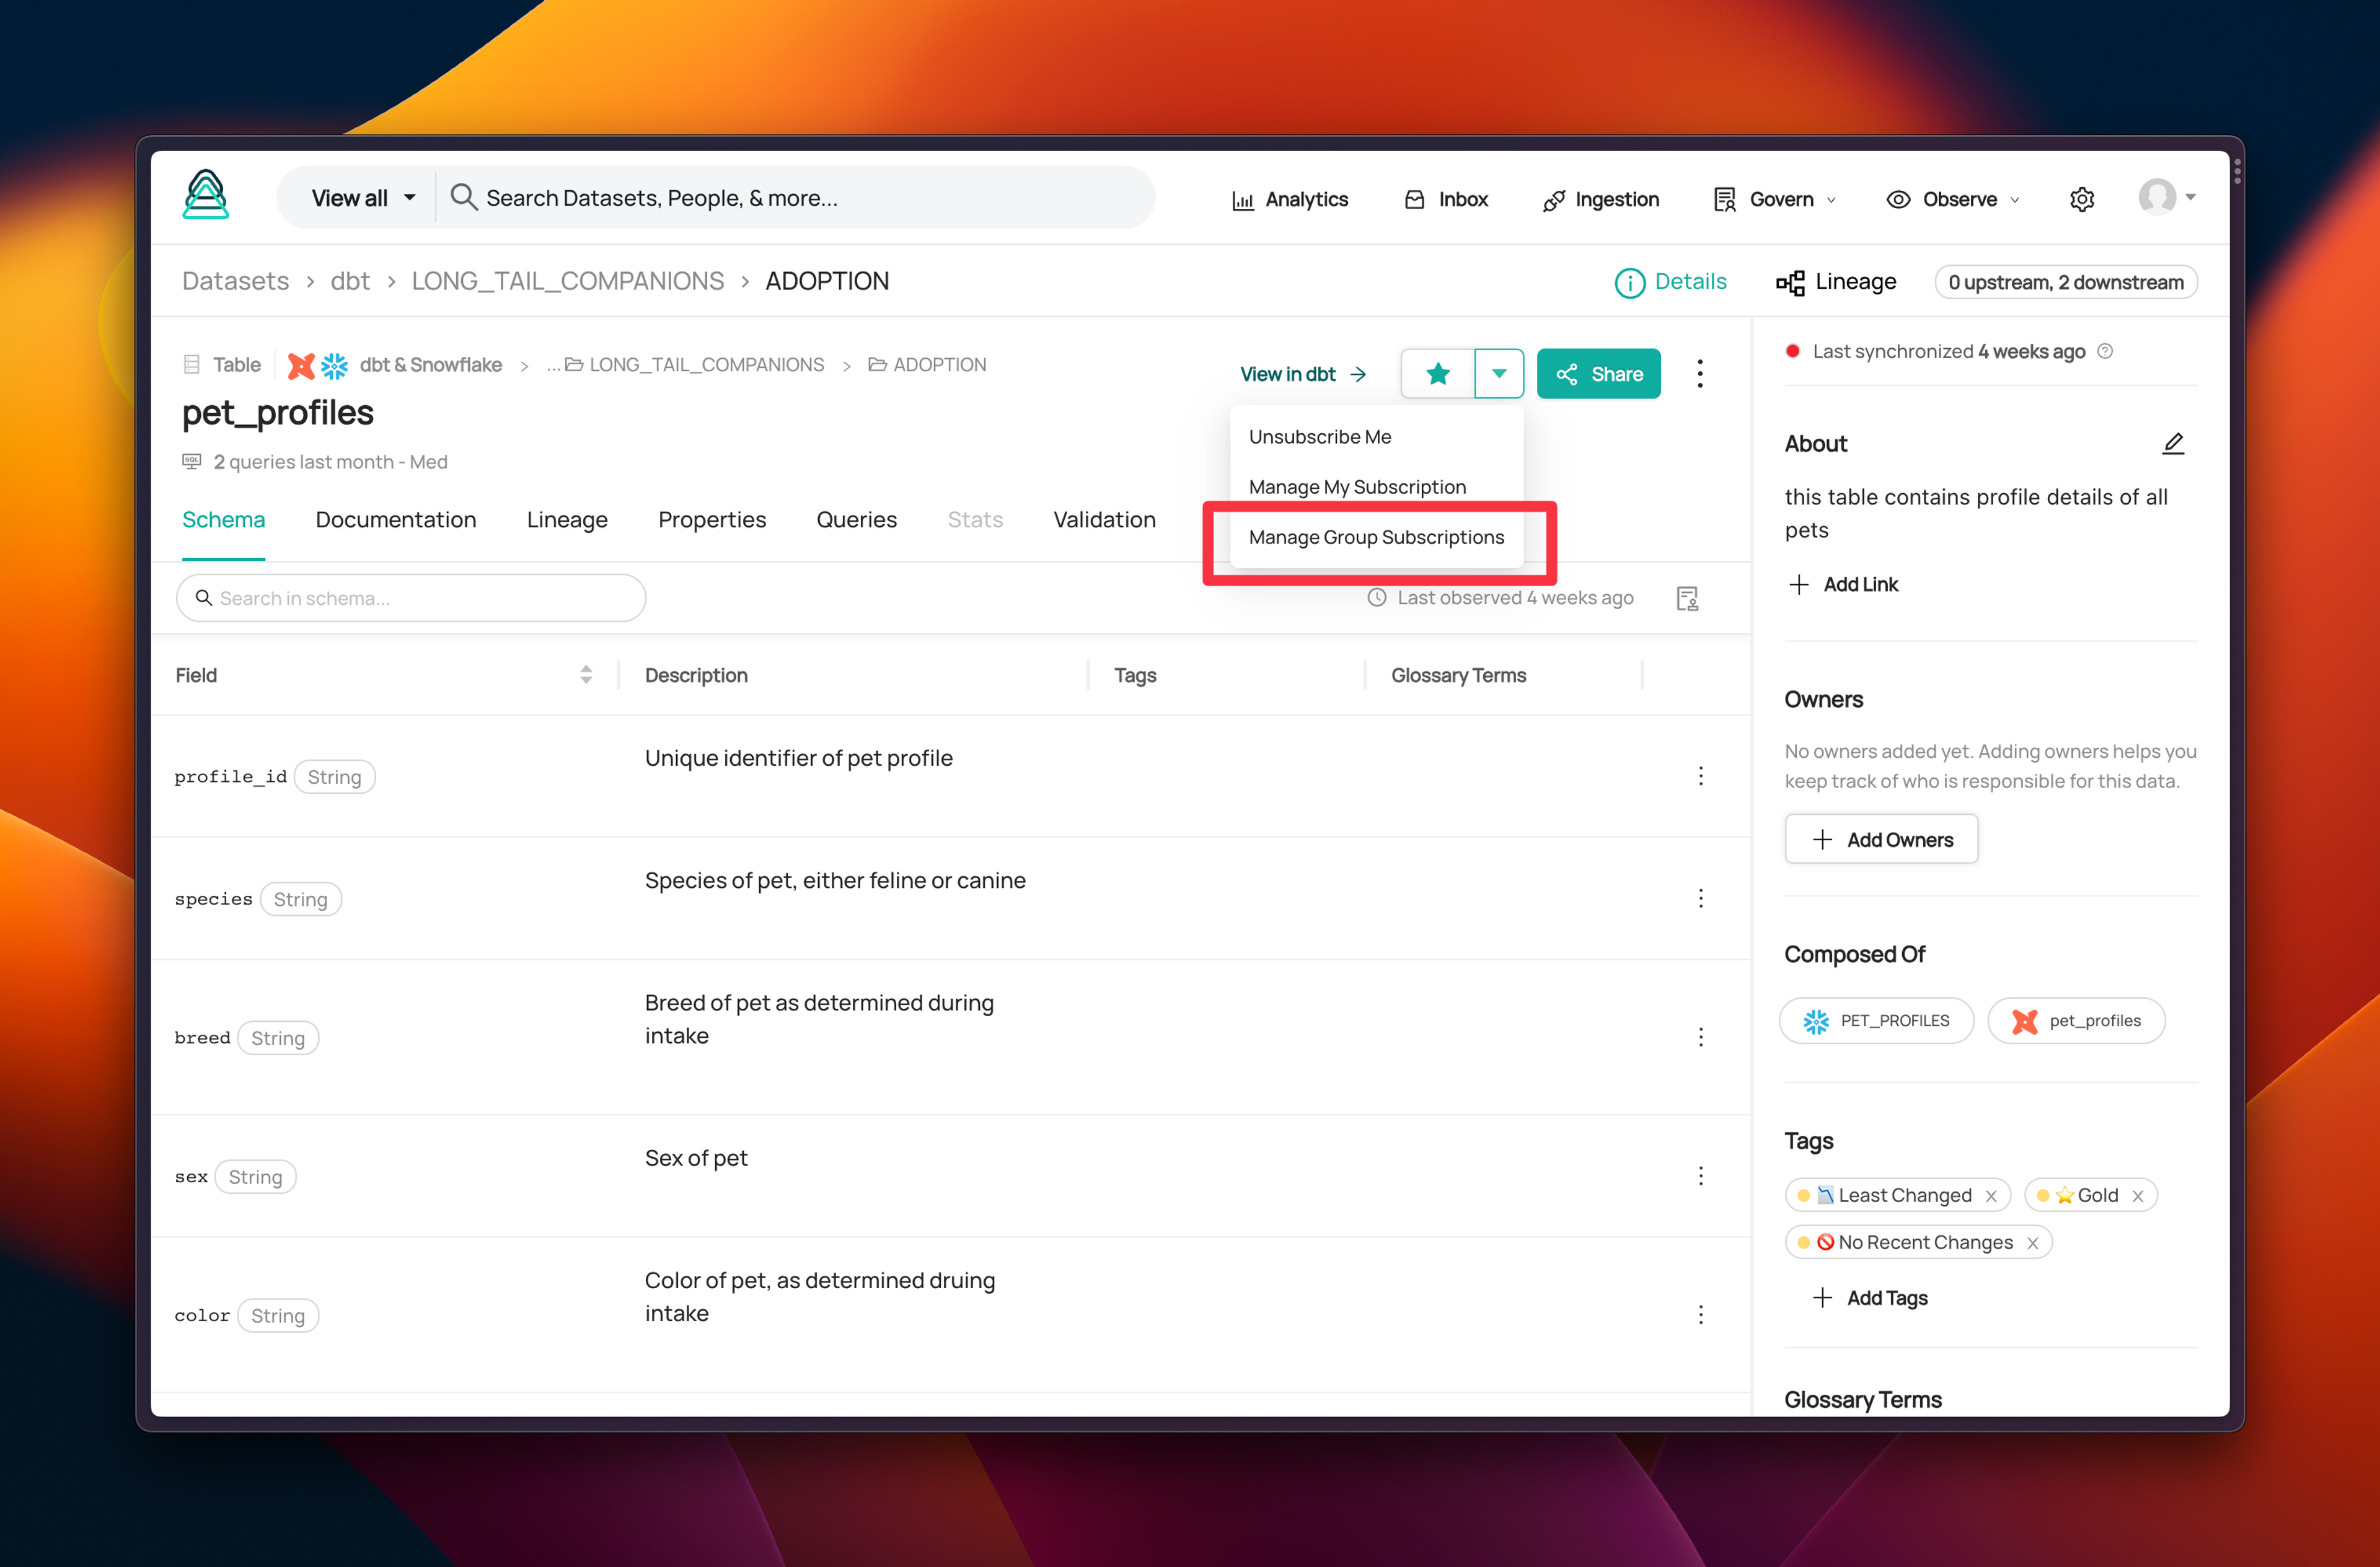 Subscription and Notifications - Manage Group Subscriptions